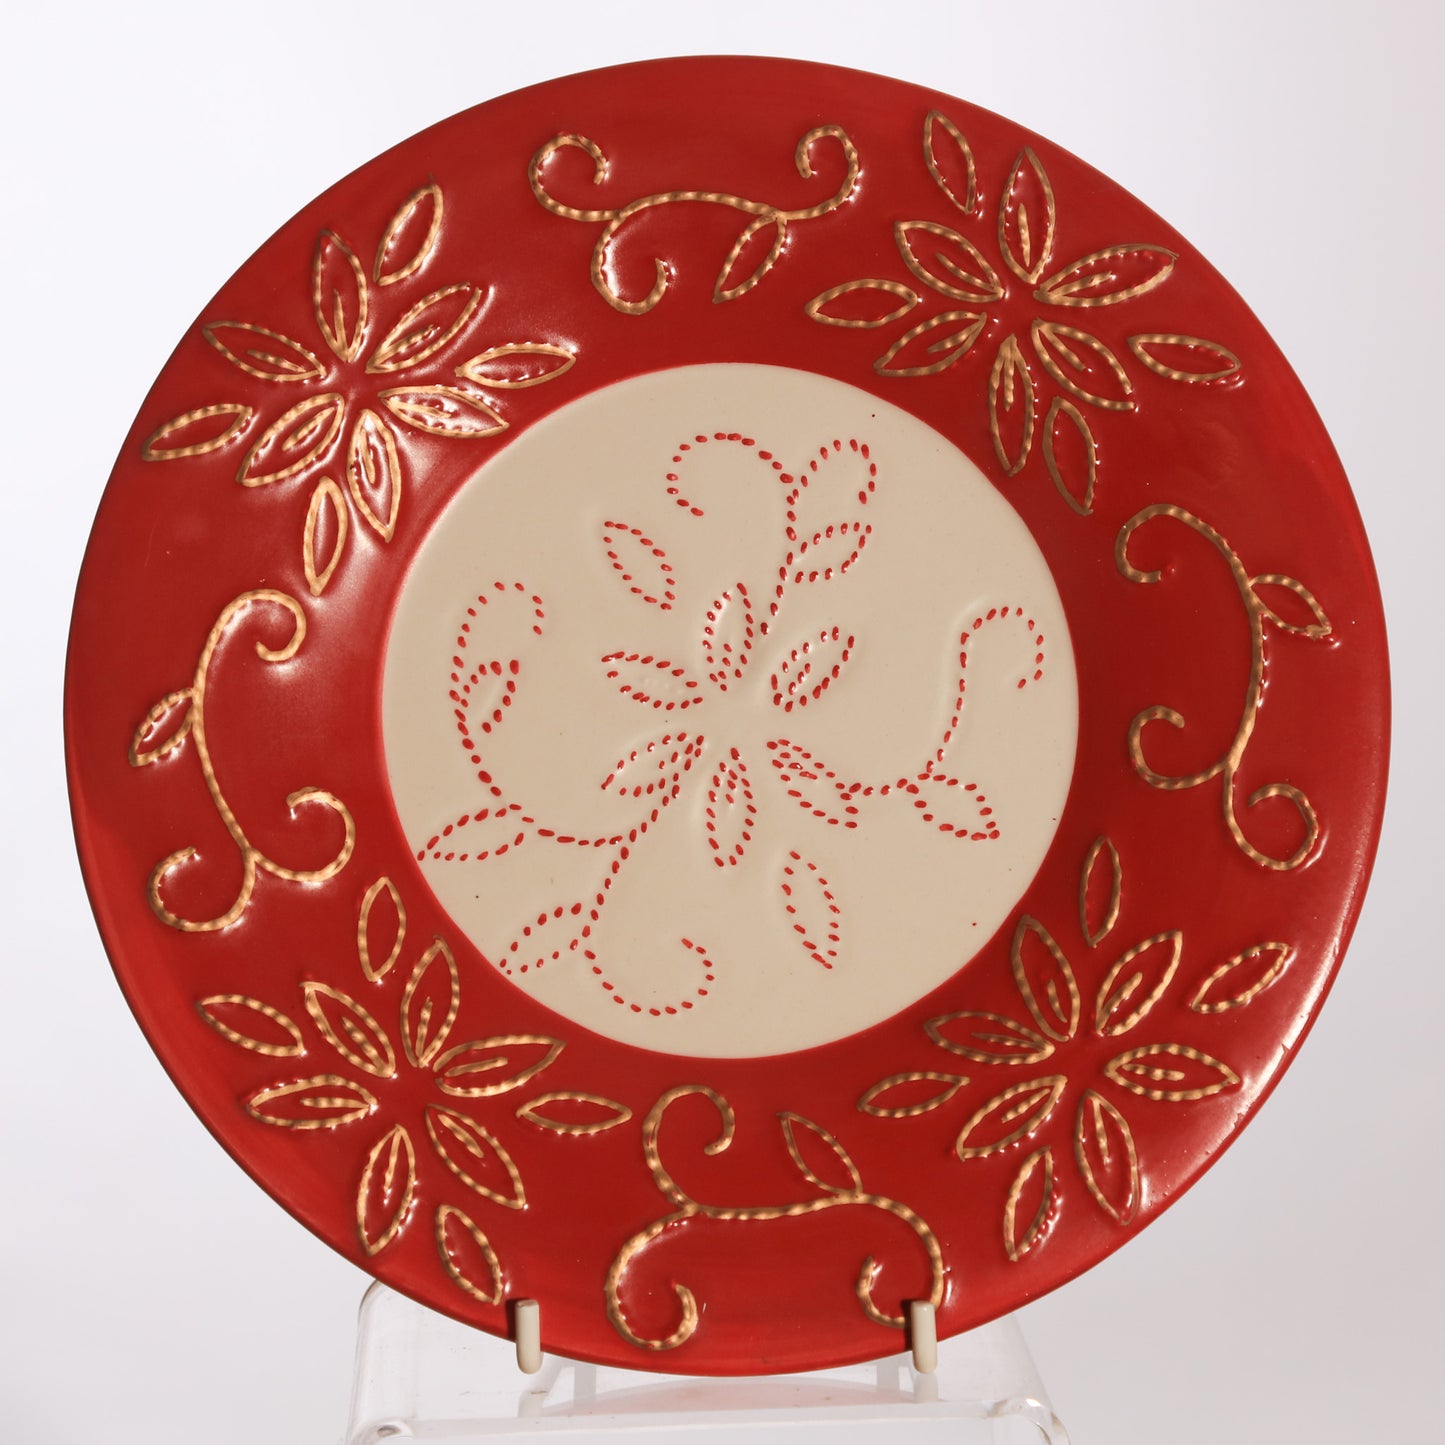 Yankee Candle Shade and tray for Medium Large Candles, Red/White/Gold